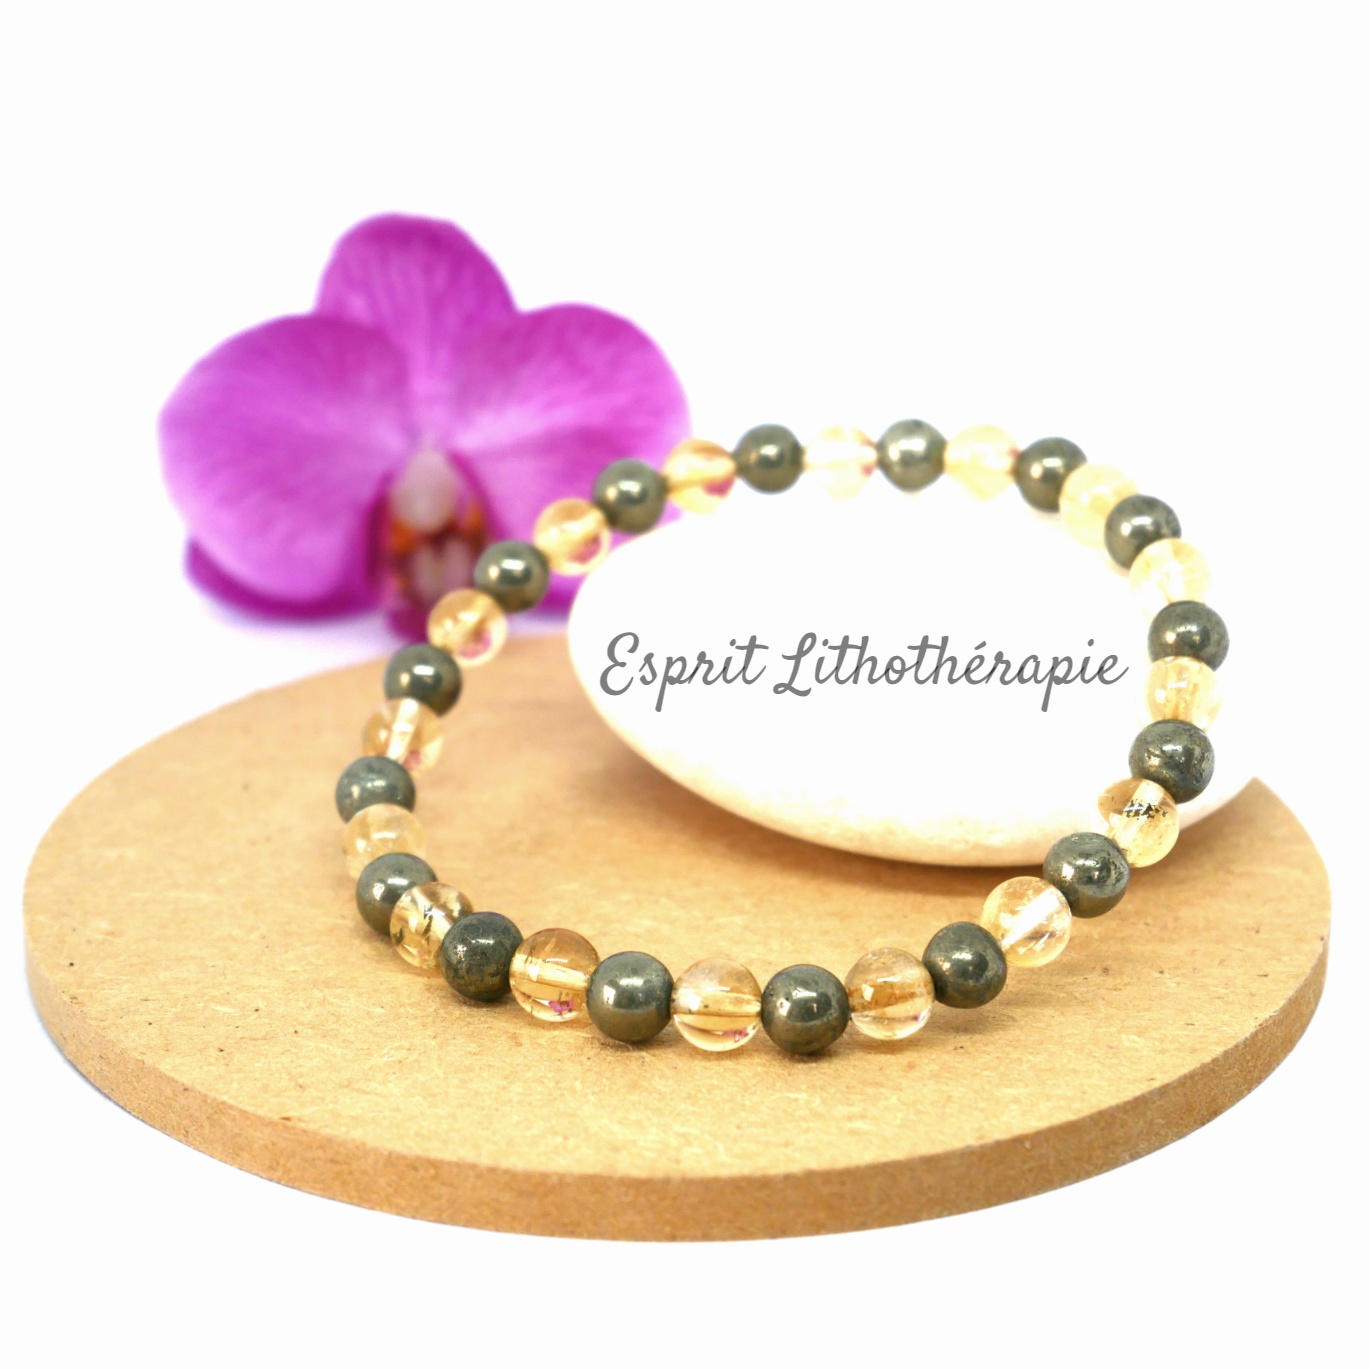 Pyrite Bracelet - Carry Prosperity & Positive Energies With You!